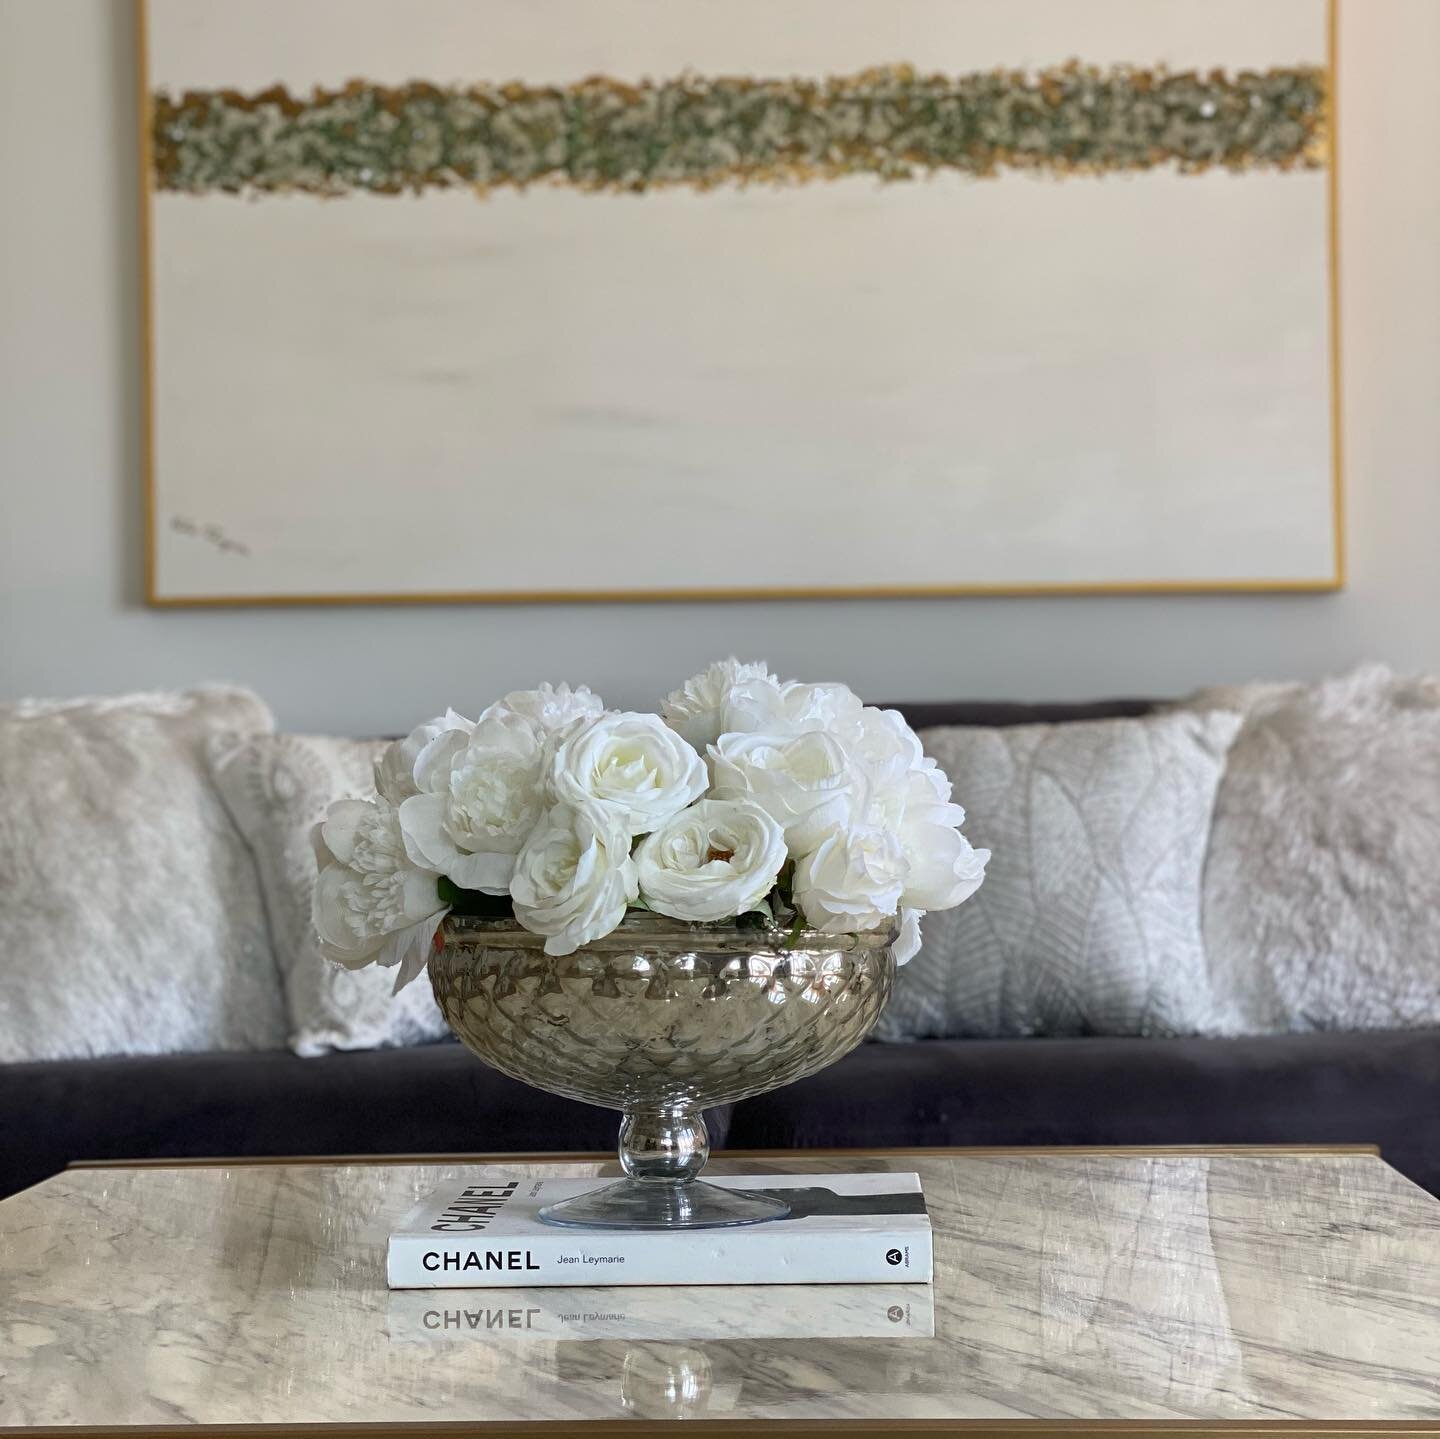 Swipe through the see the before and after of a property we just staged in Woodland Hills 🤍
&bull;
&bull;

#homestaging #interiordesign #homedecor #realestate #home #staging #interior #design #homestager #homedesign #decor #homesweethome #homestagin